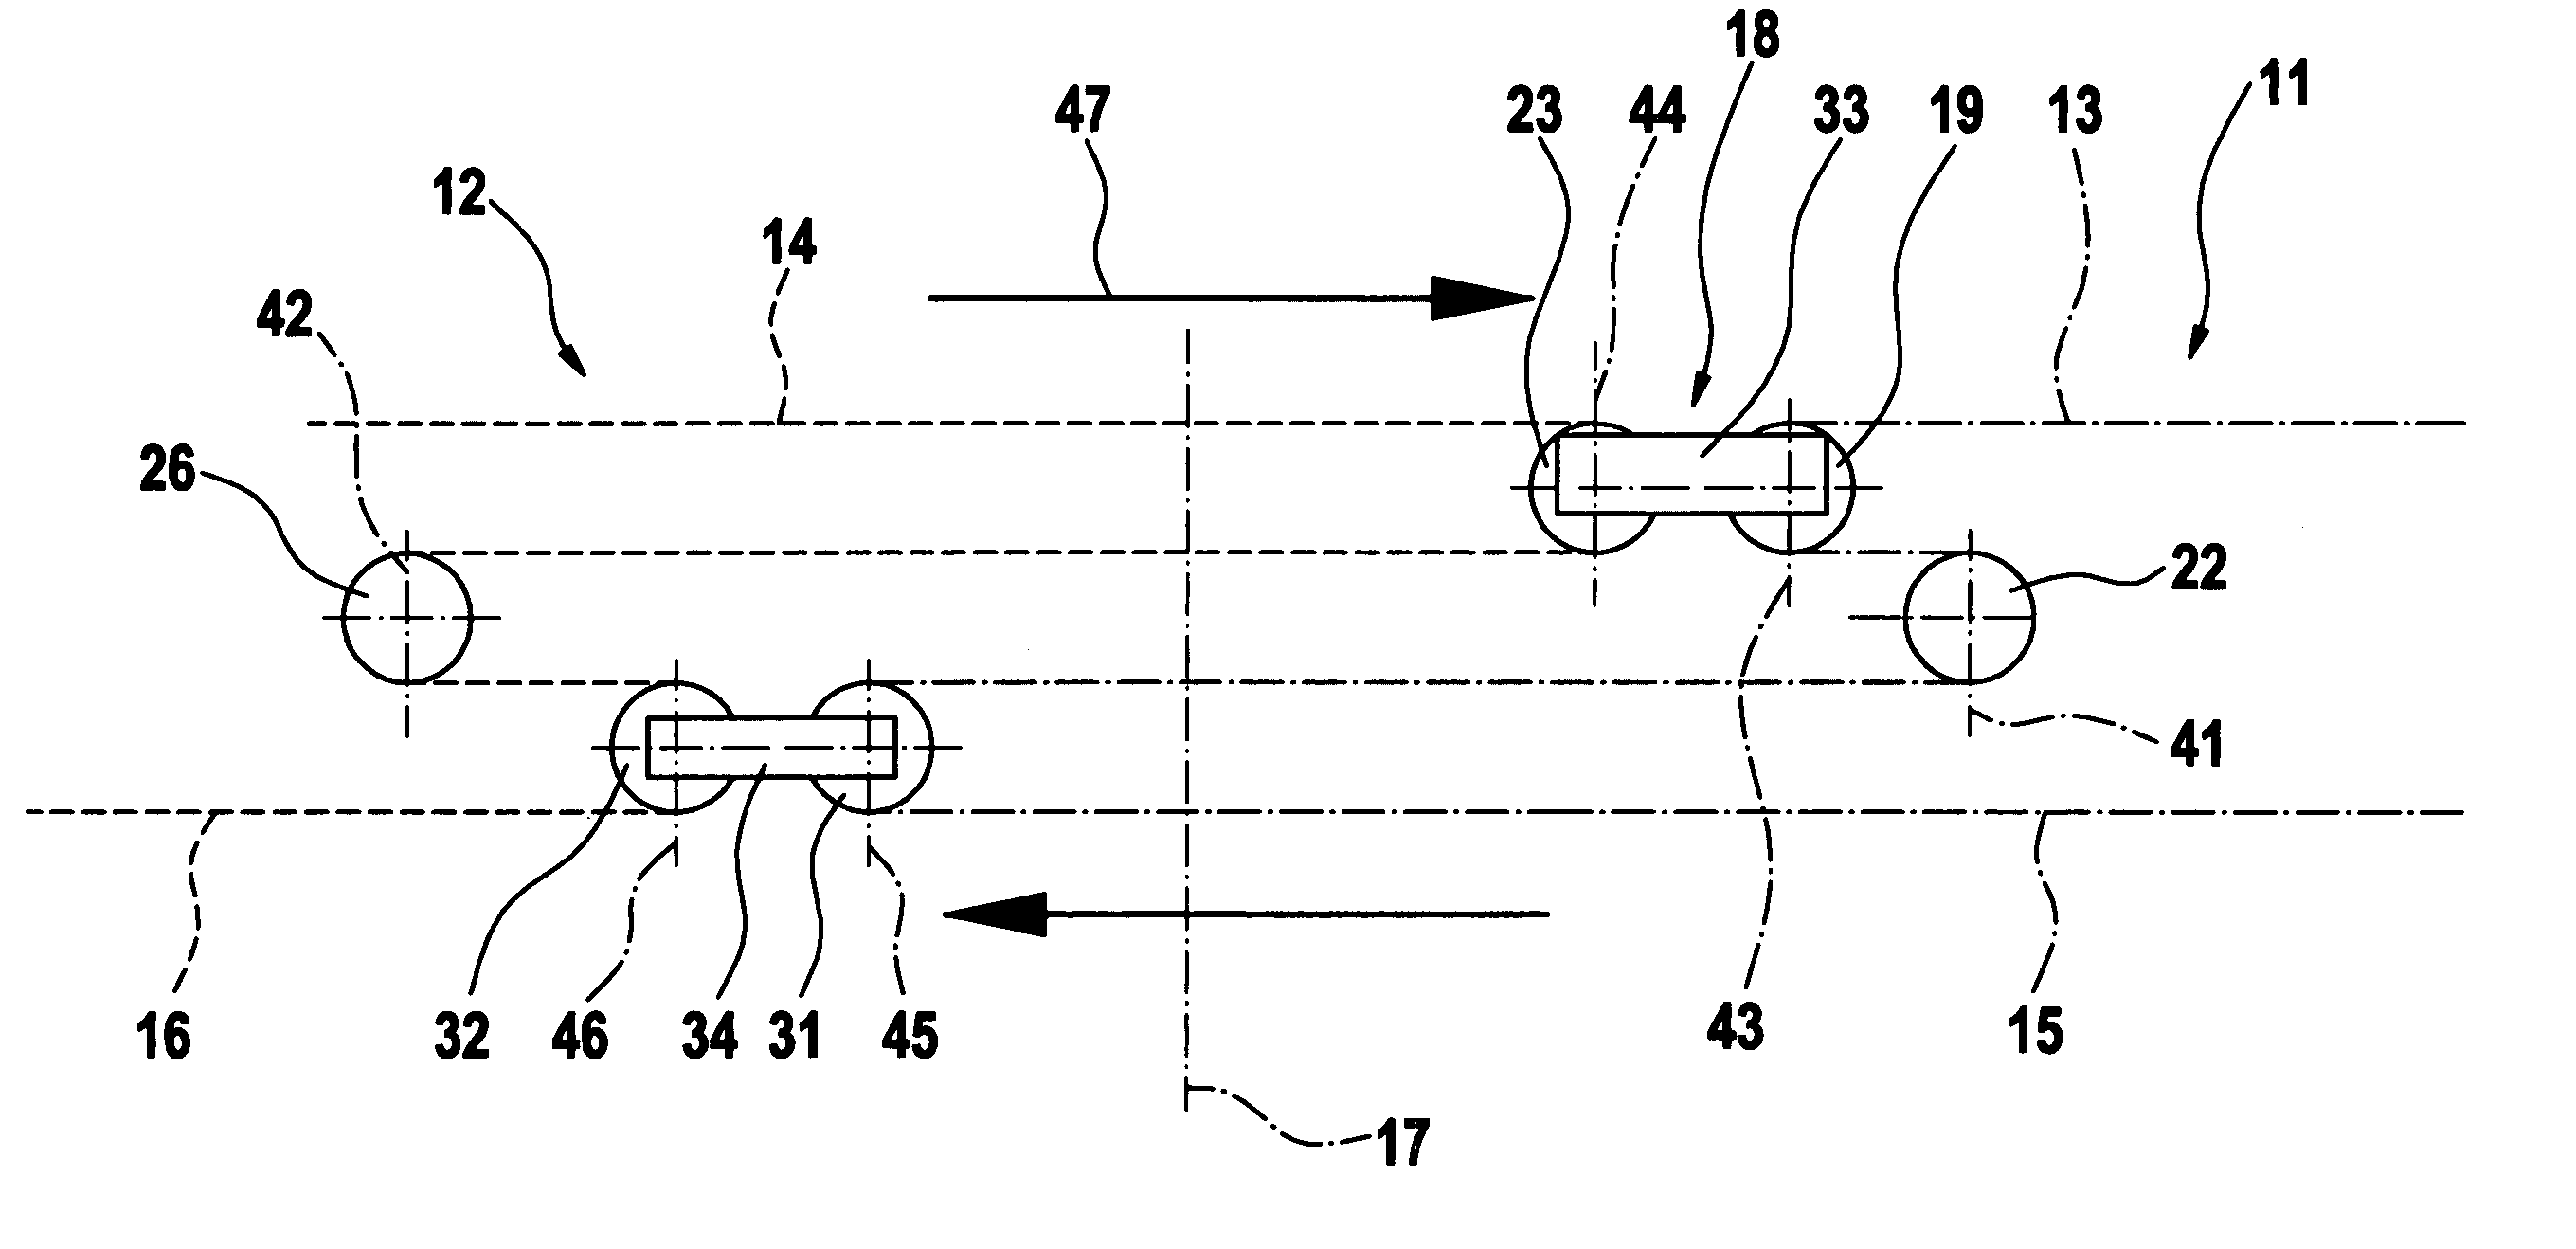 Apparatus and method for conveying objects transversely